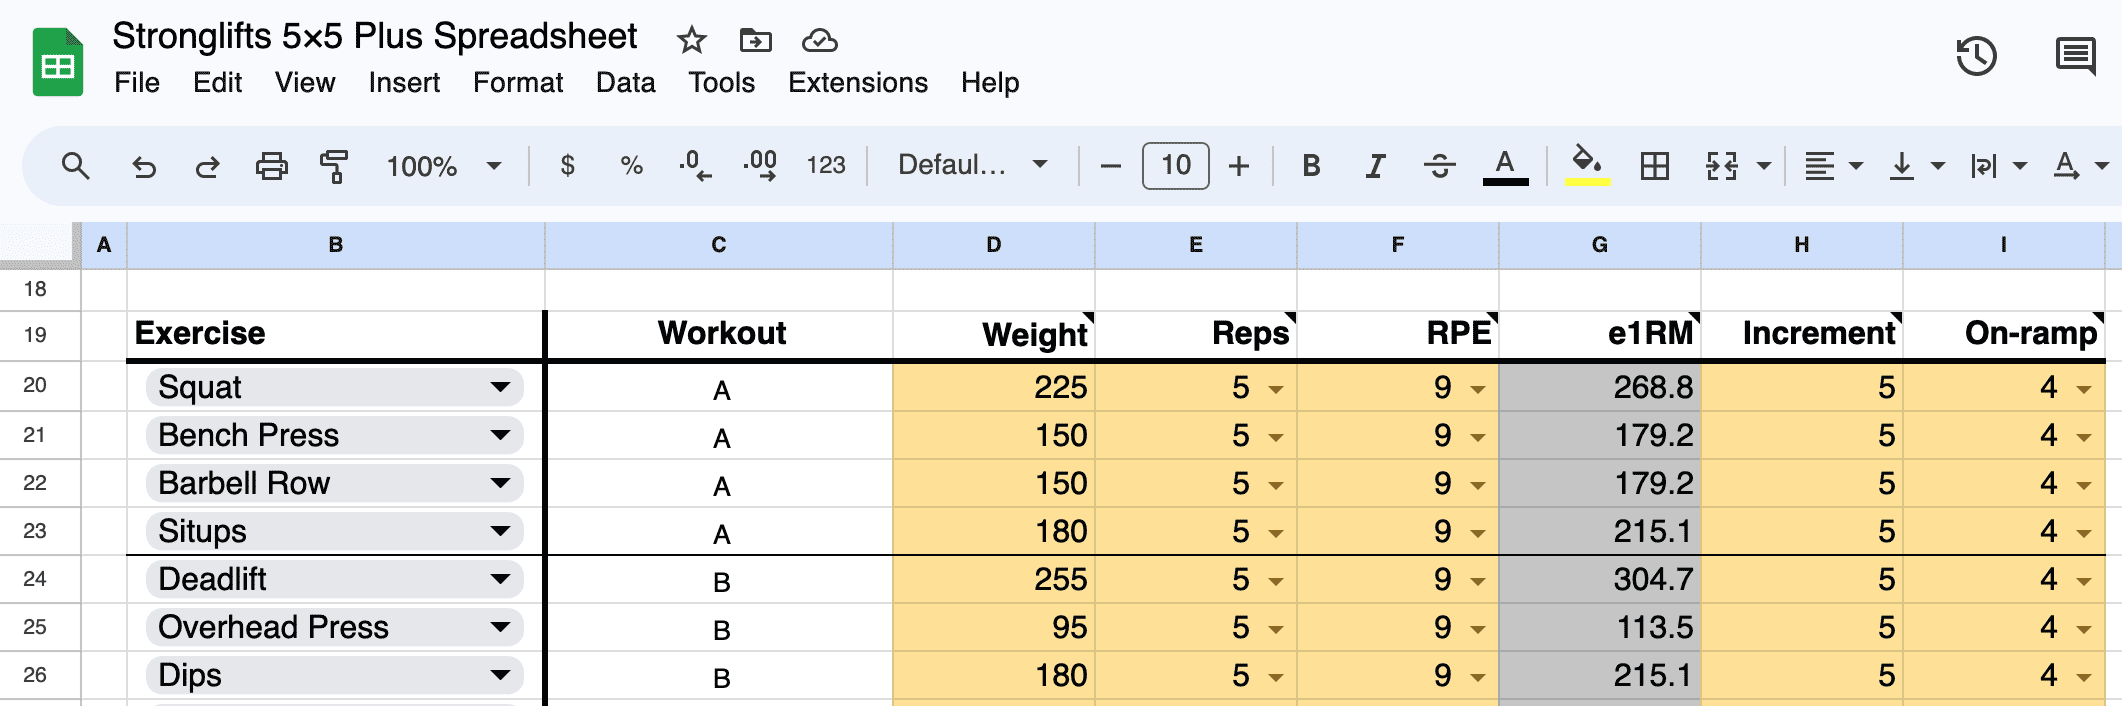 On-ramp settings Stronglifts 5x5 Plus spreadsheet